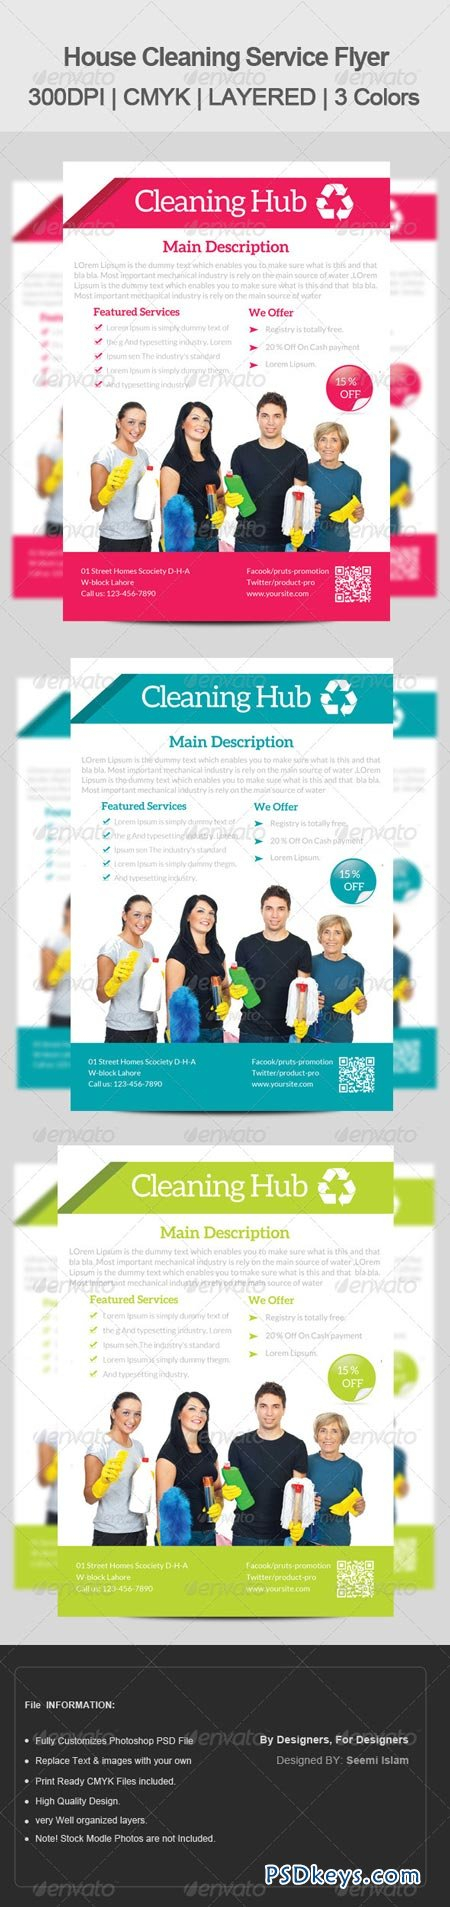 Cleaning » Page 3 » Free Download Photoshop Vector Stock Within House Cleaning Flyer Template